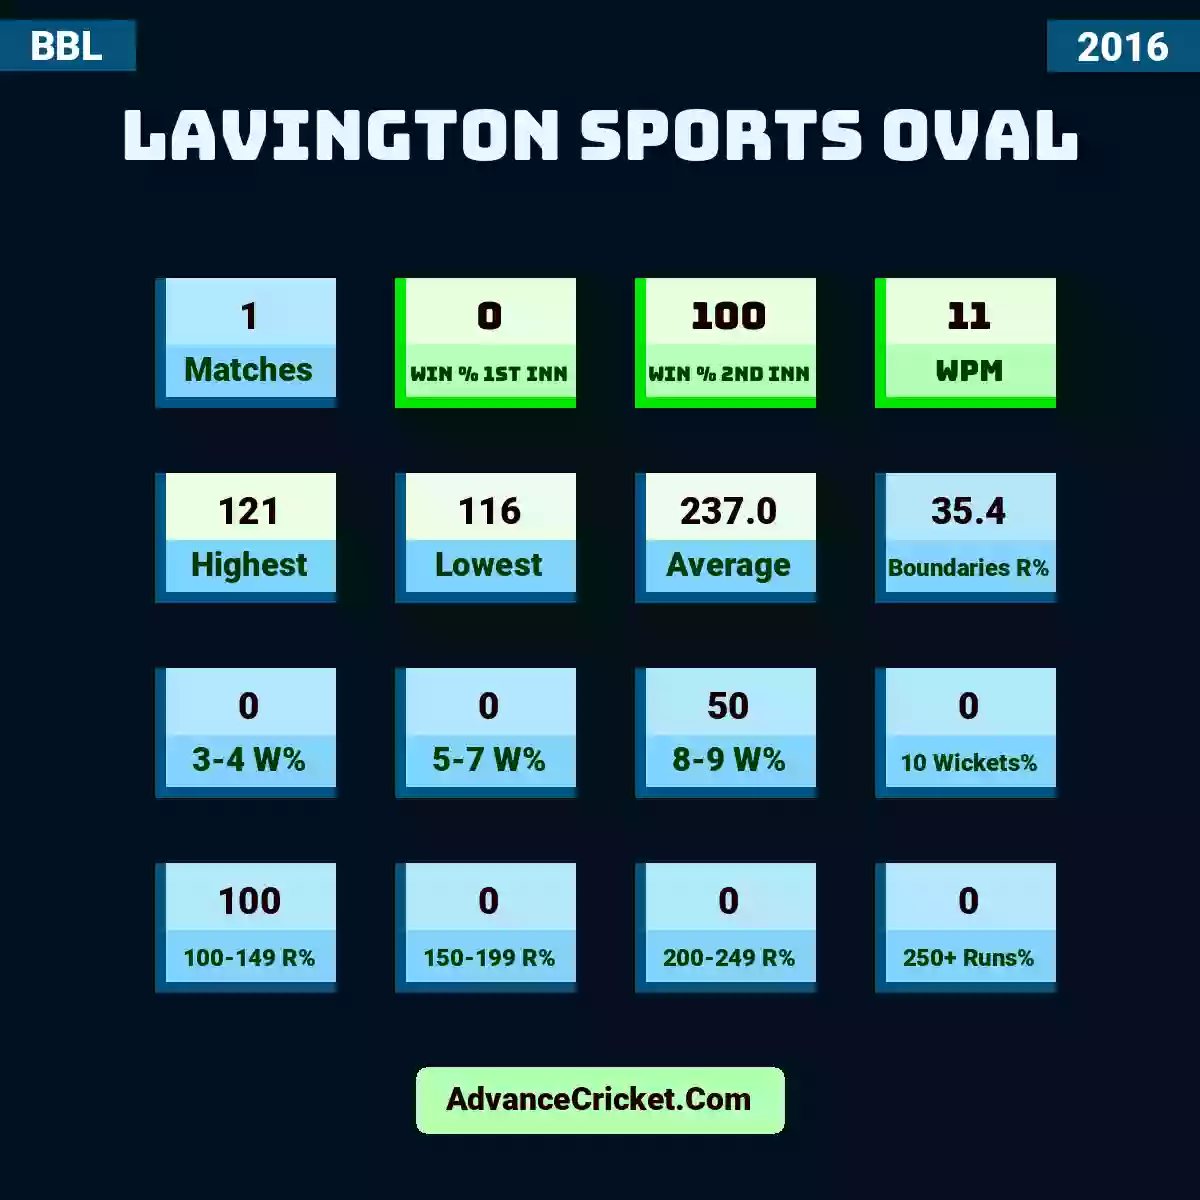 Image showing Lavington Sports Oval with Matches: 1, Win % 1st Inn: 0, Win % 2nd Inn: 100, WPM: 11, Highest: 121, Lowest: 116, Average: 237.0, Boundaries R%: 35.4, 3-4 W%: 0, 5-7 W%: 0, 8-9 W%: 50, 10 Wickets%: 0, 100-149 R%: 100, 150-199 R%: 0, 200-249 R%: 0, 250+ Runs%: 0.